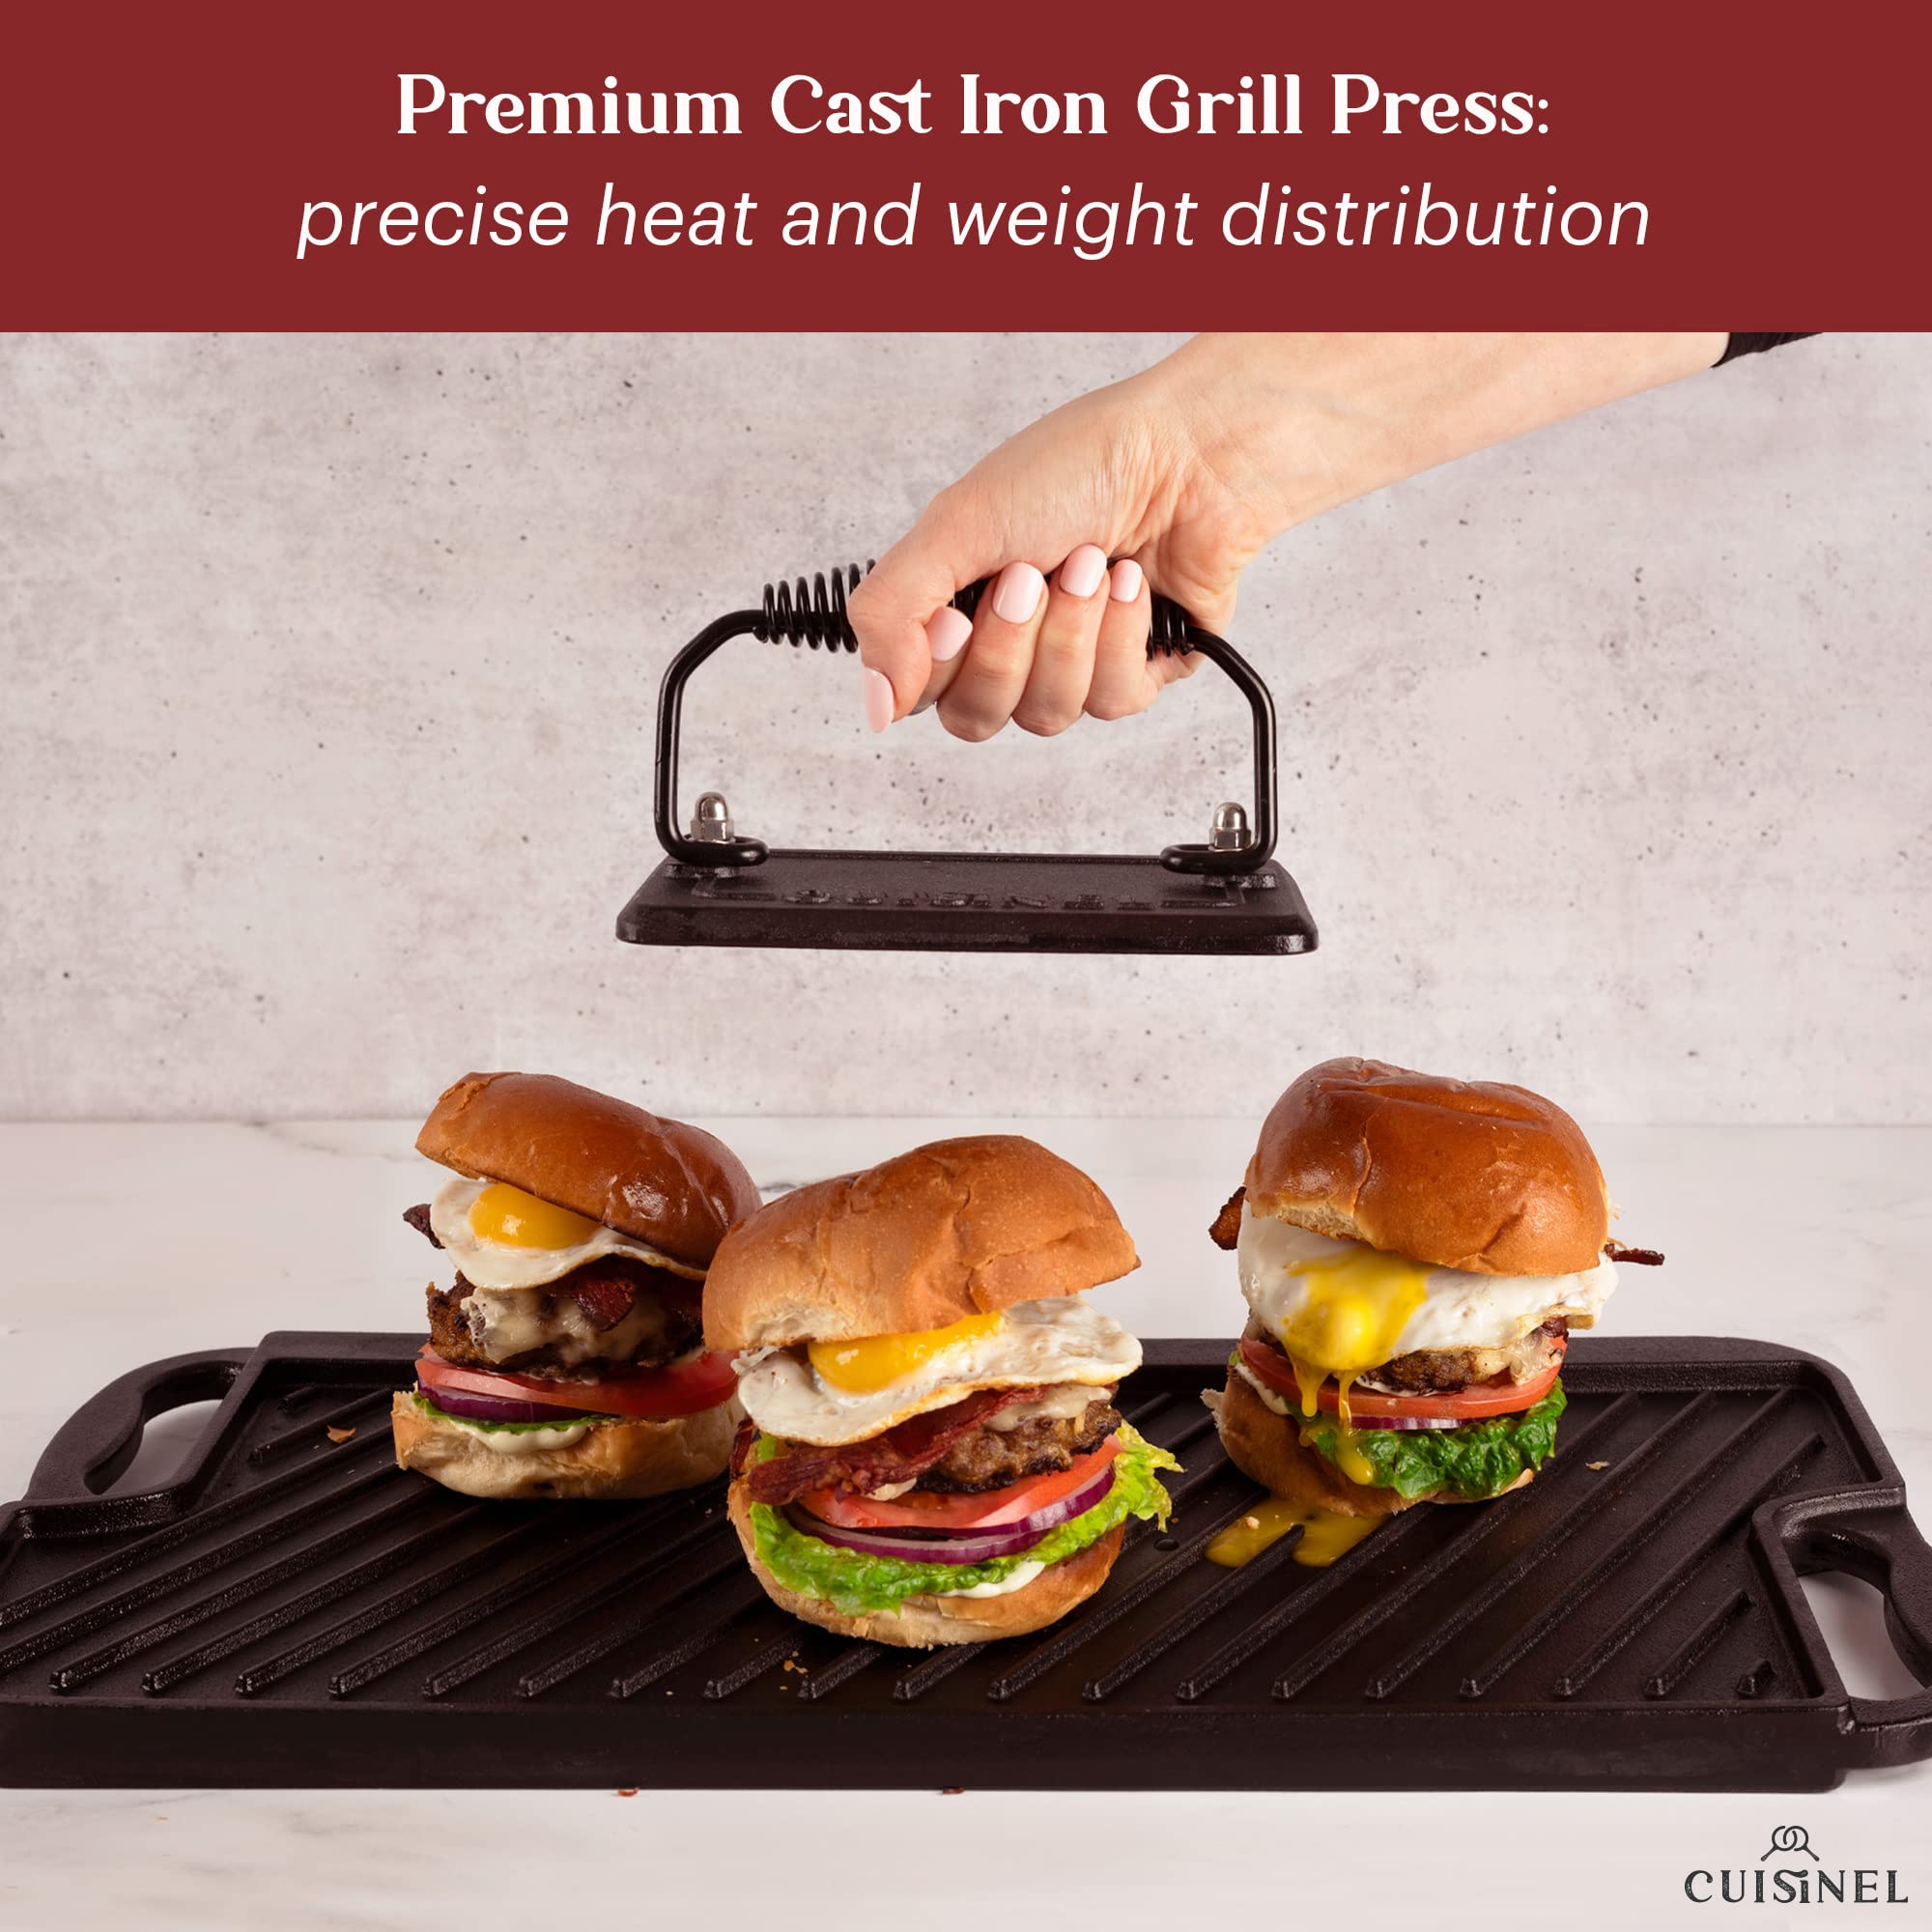 Cuisinel Cast Iron Griddle/Grill - Pre-Seasoned Reversible Blackstone Cover BBQ Accessories + Burger Hamburger Press Smasher + Pan Scraper/Cleaner for Skillets Frying Pans - Indoor/Outdoor  - Good